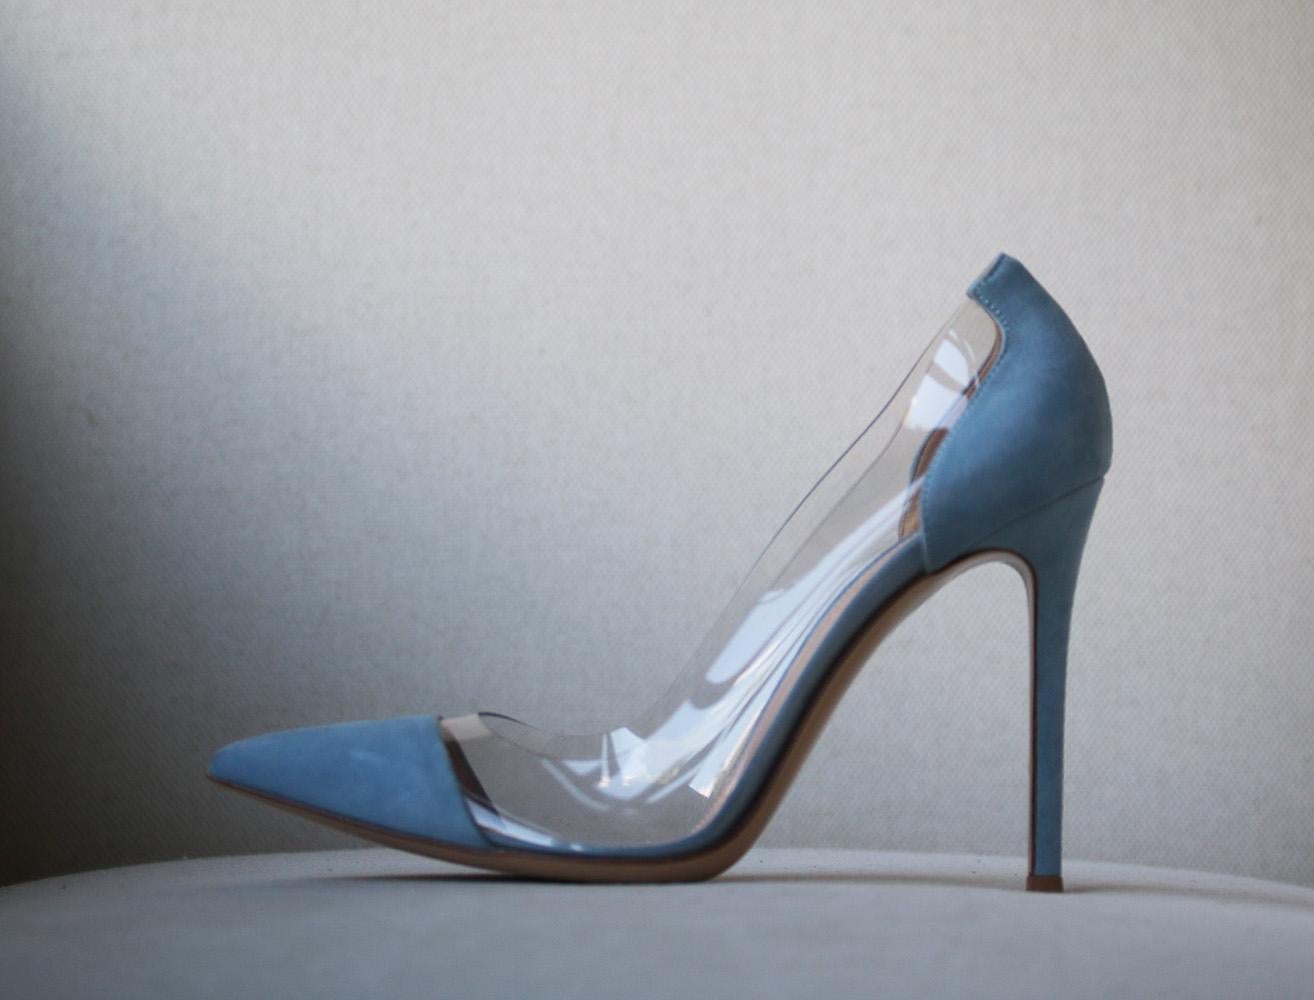 Gianvito Rossi's 'Plexi' pumps are made with clear PVC panels and a sleek pointed toe to create the illusion of longer legs. Crafted from textured suede, this pair is set on a 105mm stiletto heel and designed in a versatile powder blue that will go